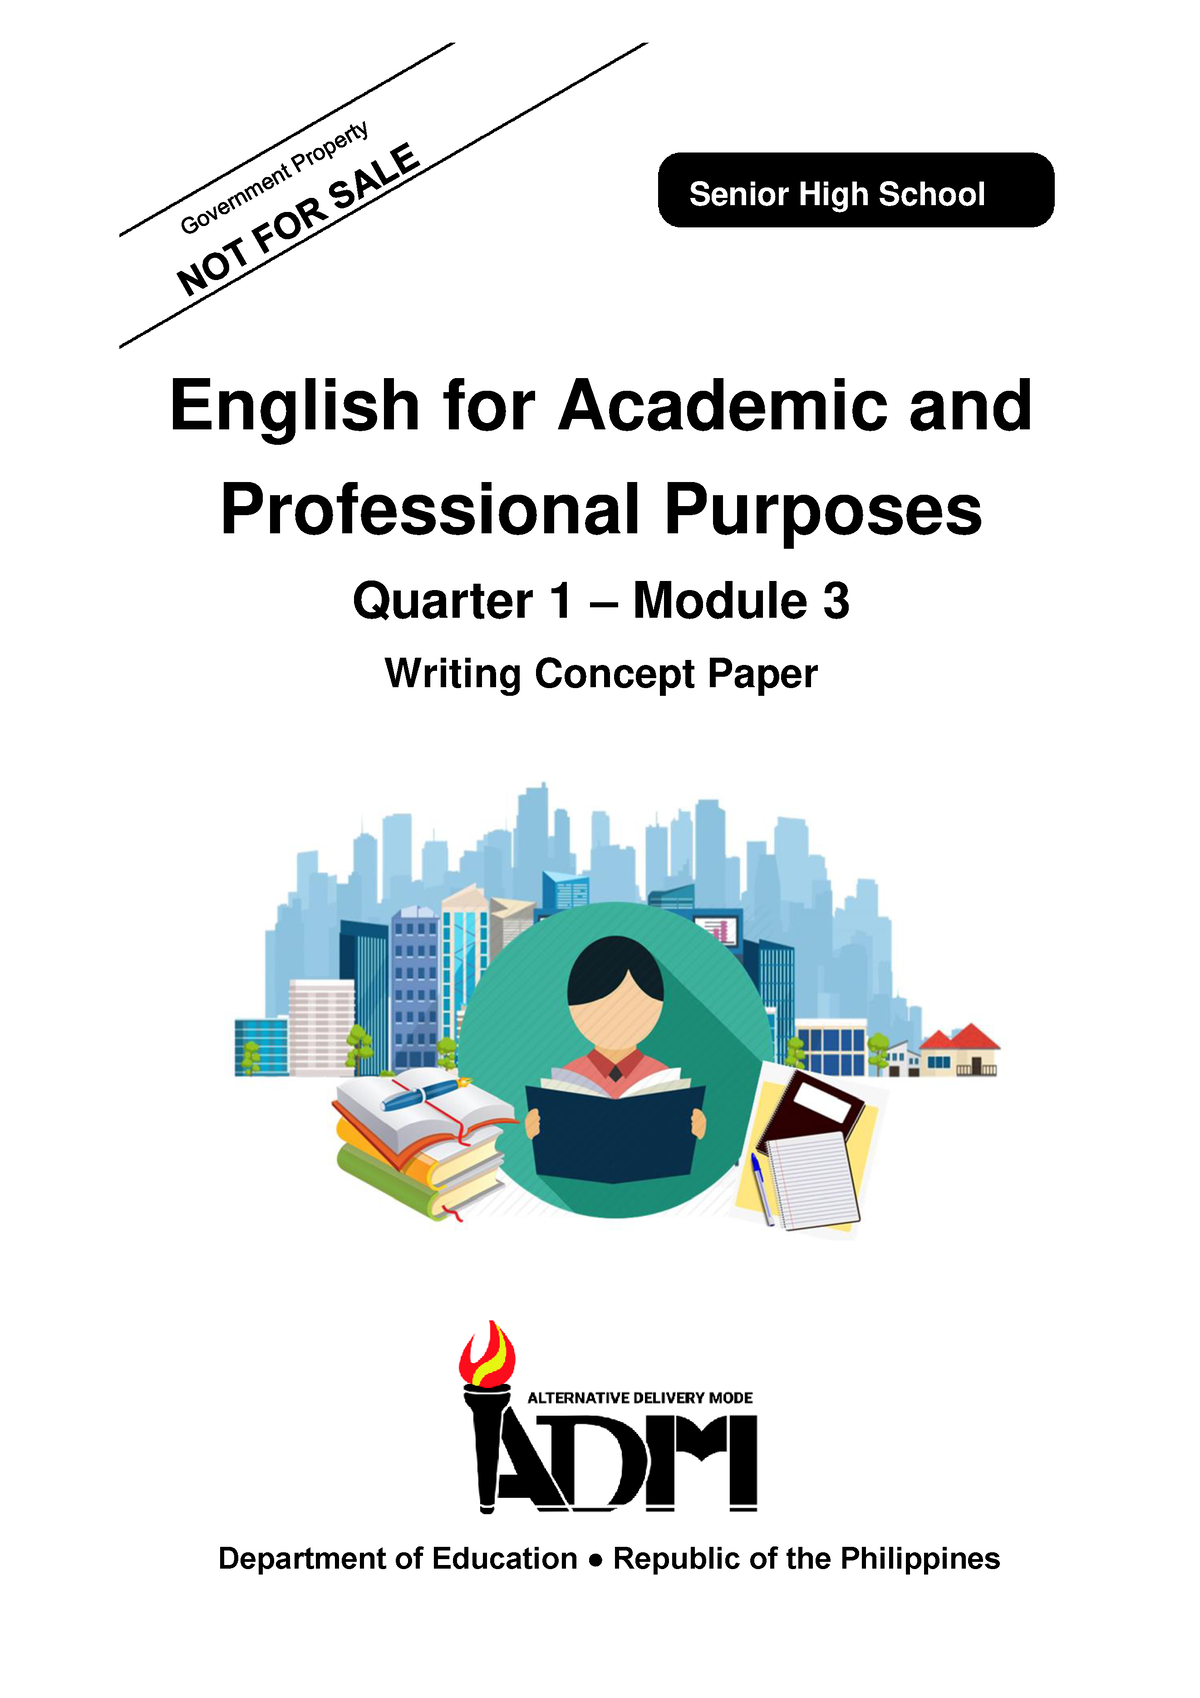 english-for-academic-professional-purposes-12-quarter-1-module-3-english-for-academic-and